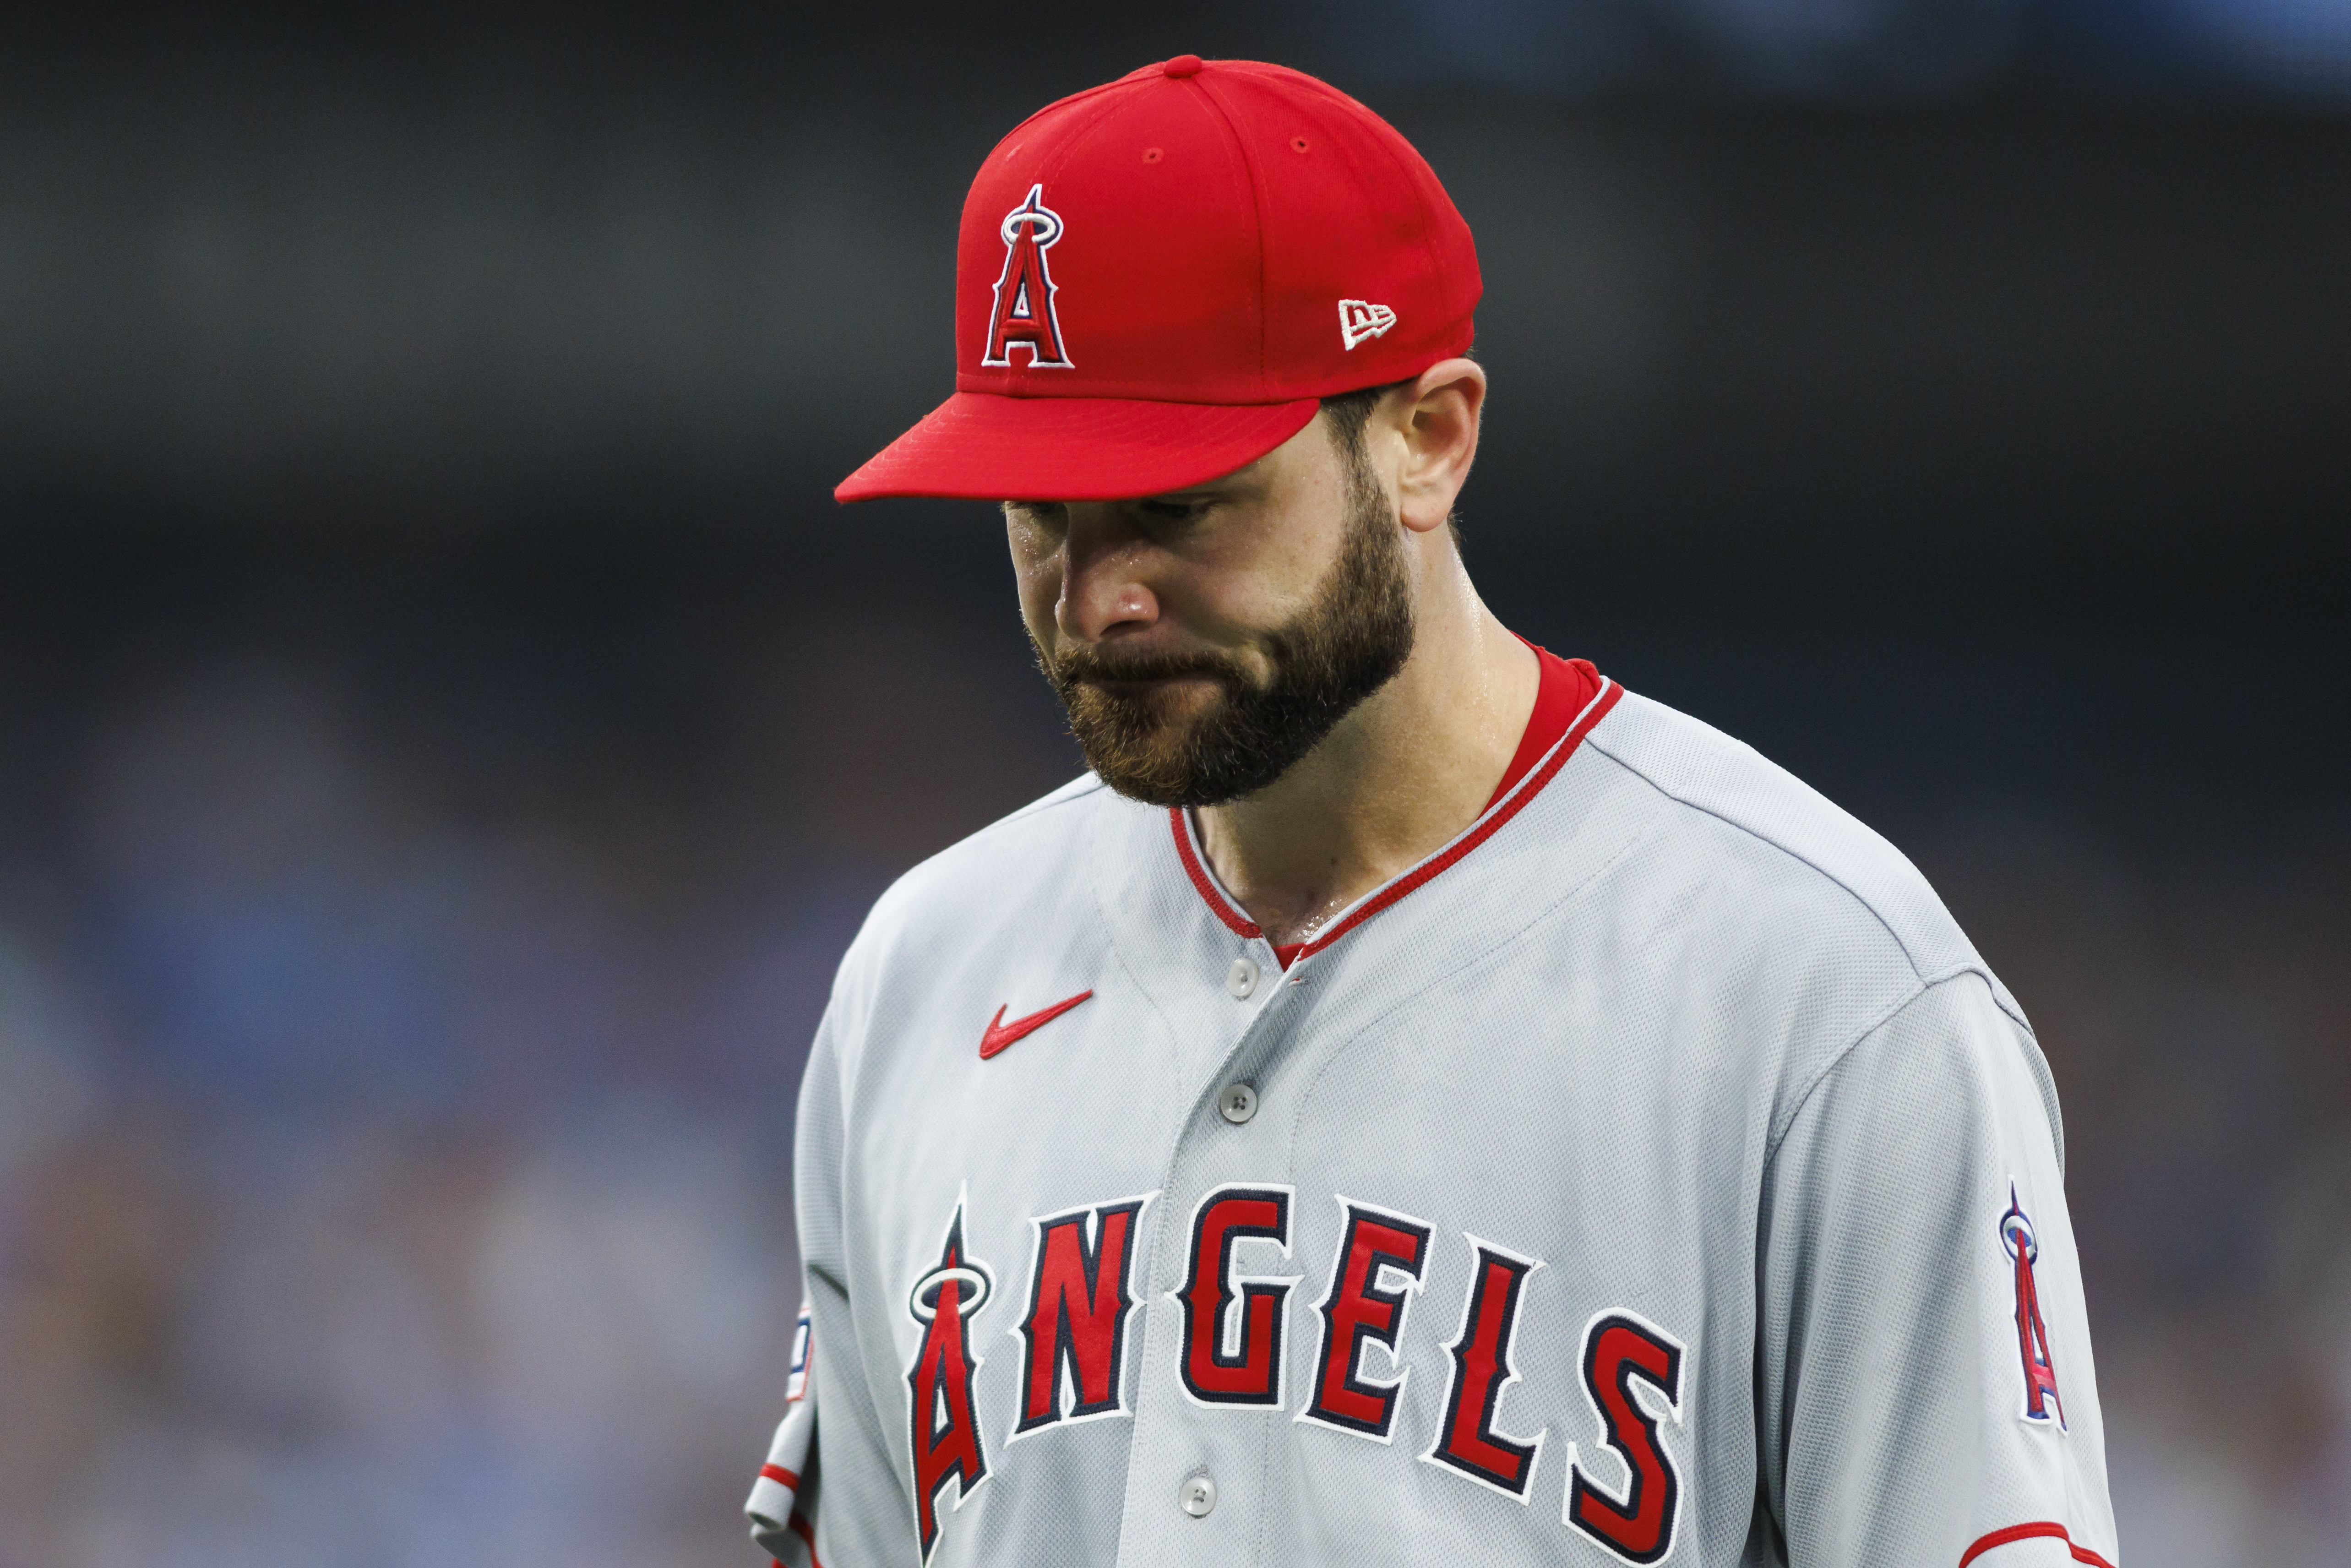 MLB Trade Deadline 2023: Los Angeles Angels acquire Randal Grichuk